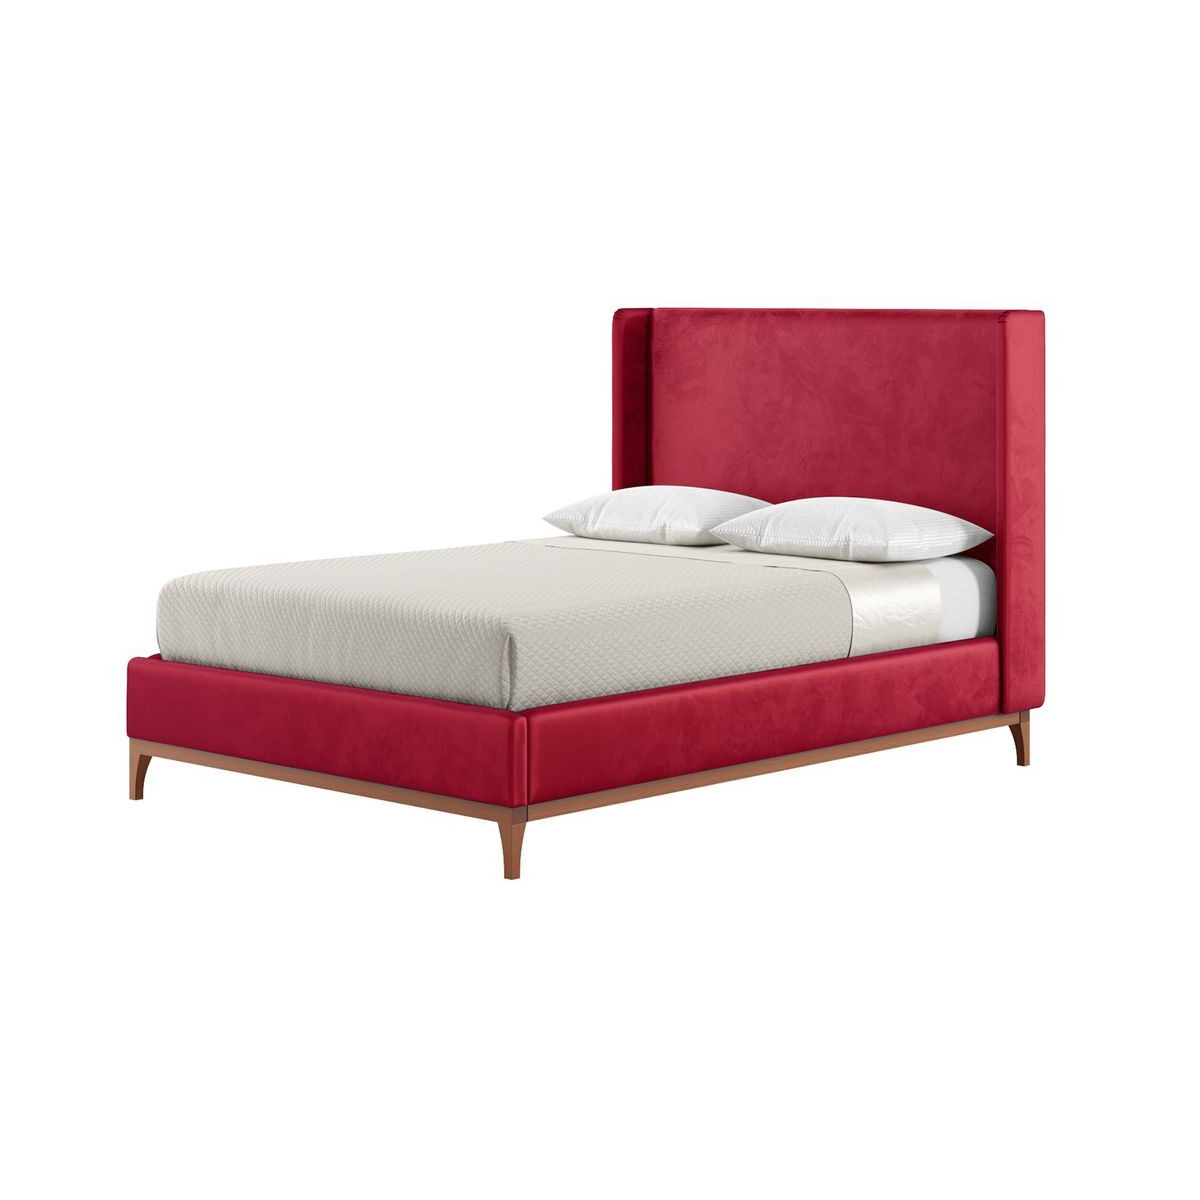 Diane 4ft6 Double Bed Frame with modern smooth wing headboard, dark red, Leg colour: aveo - image 1